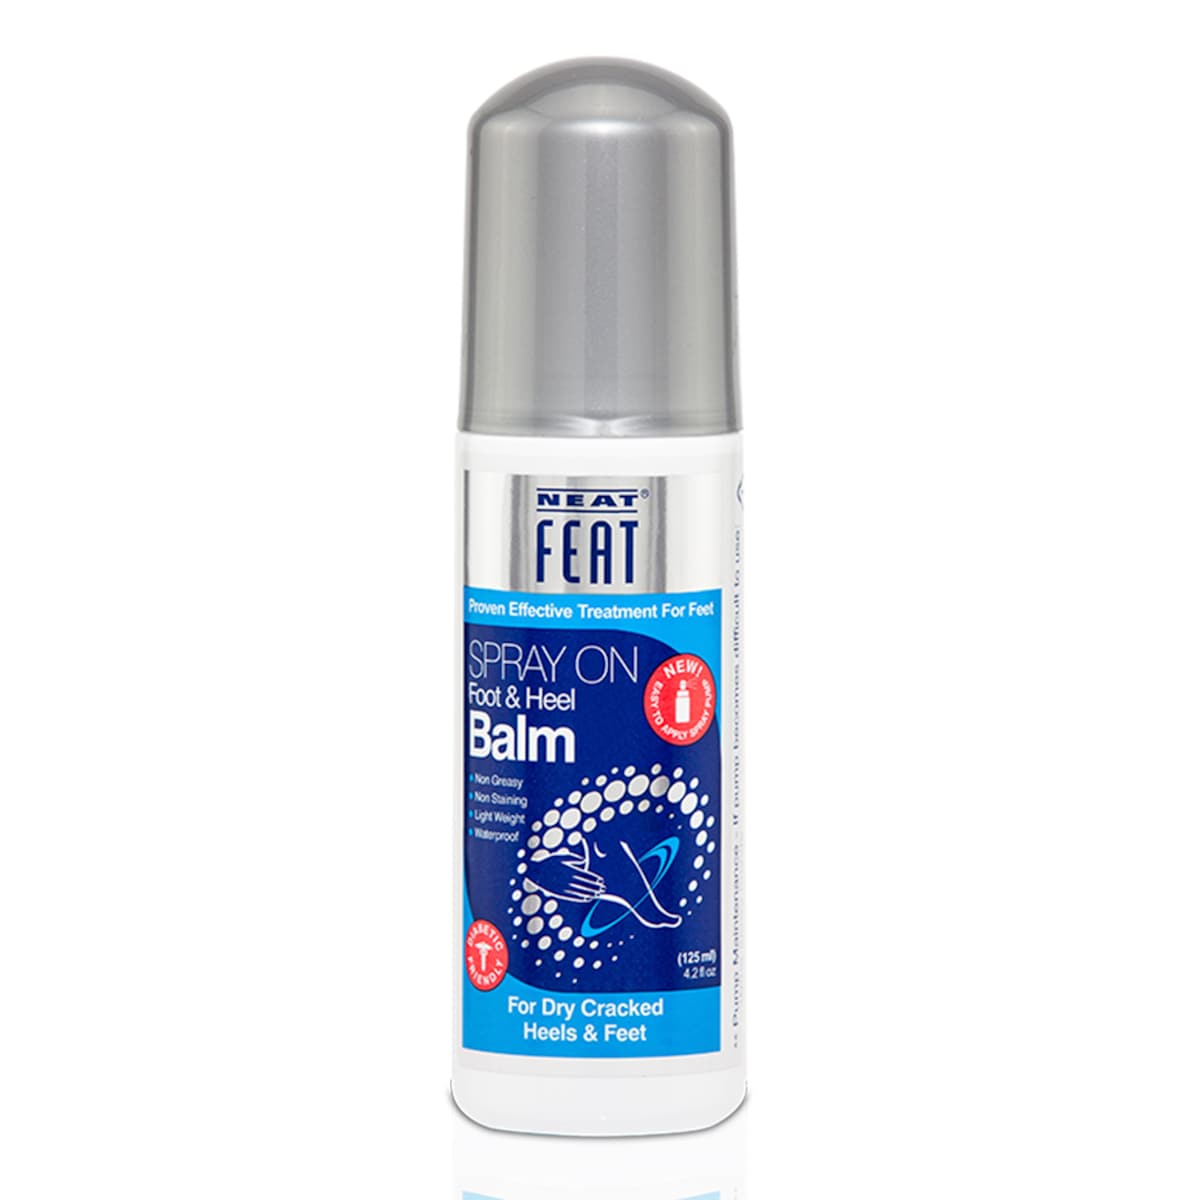 Neat Feat Spray on Foot & Heel Balm for Dry & Cracked Heels 125ml